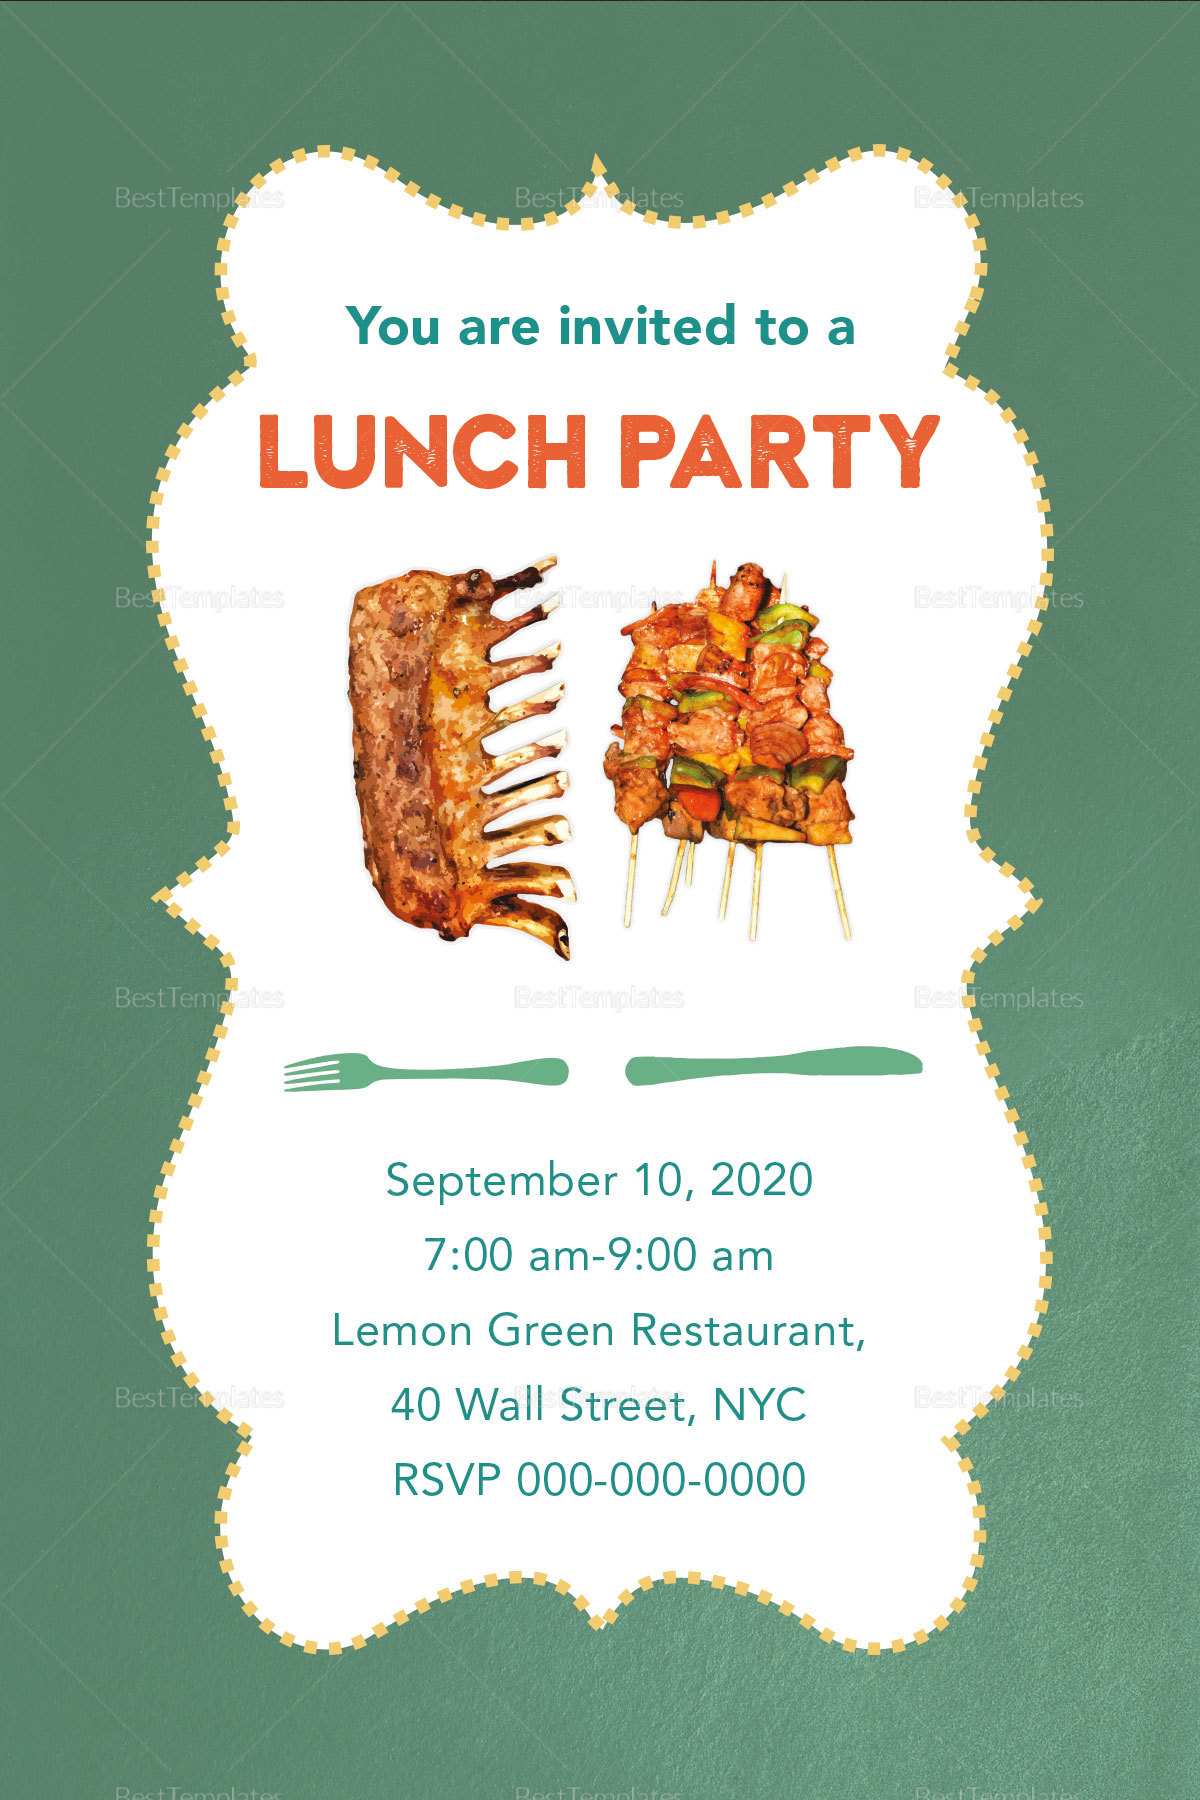 85-creative-lunch-party-invitation-template-download-for-lunch-party-invitation-template-cards